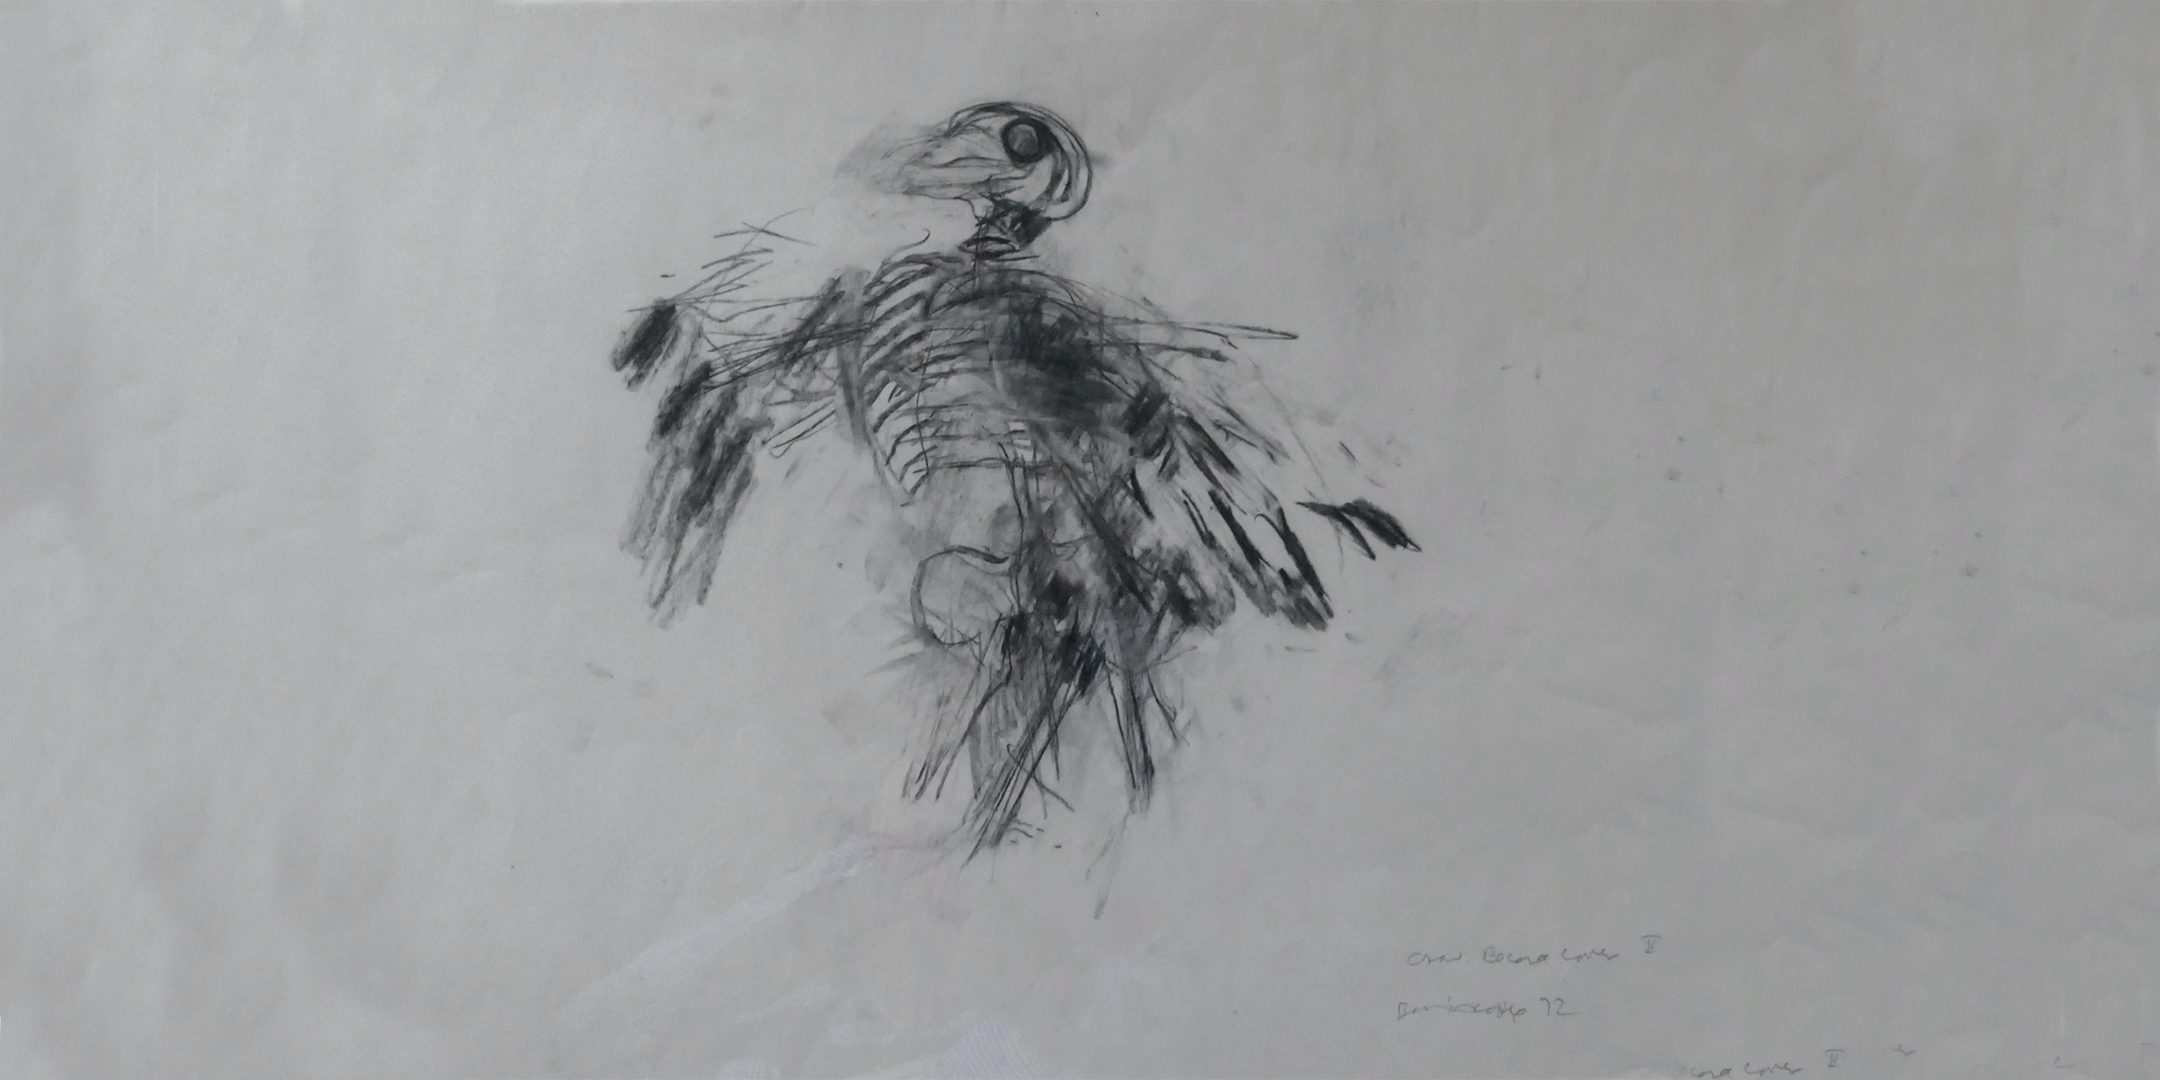 Barrie Cooke, ‘Crow II’ (Charcoal drawing, 1972) for the cover sleeve of Ted Hughes’ recording of Crow for Claddagh Records. Credit: The Estate of Barrie Cooke. Photograph by the Cambridge Colleges Conservation Consortium.